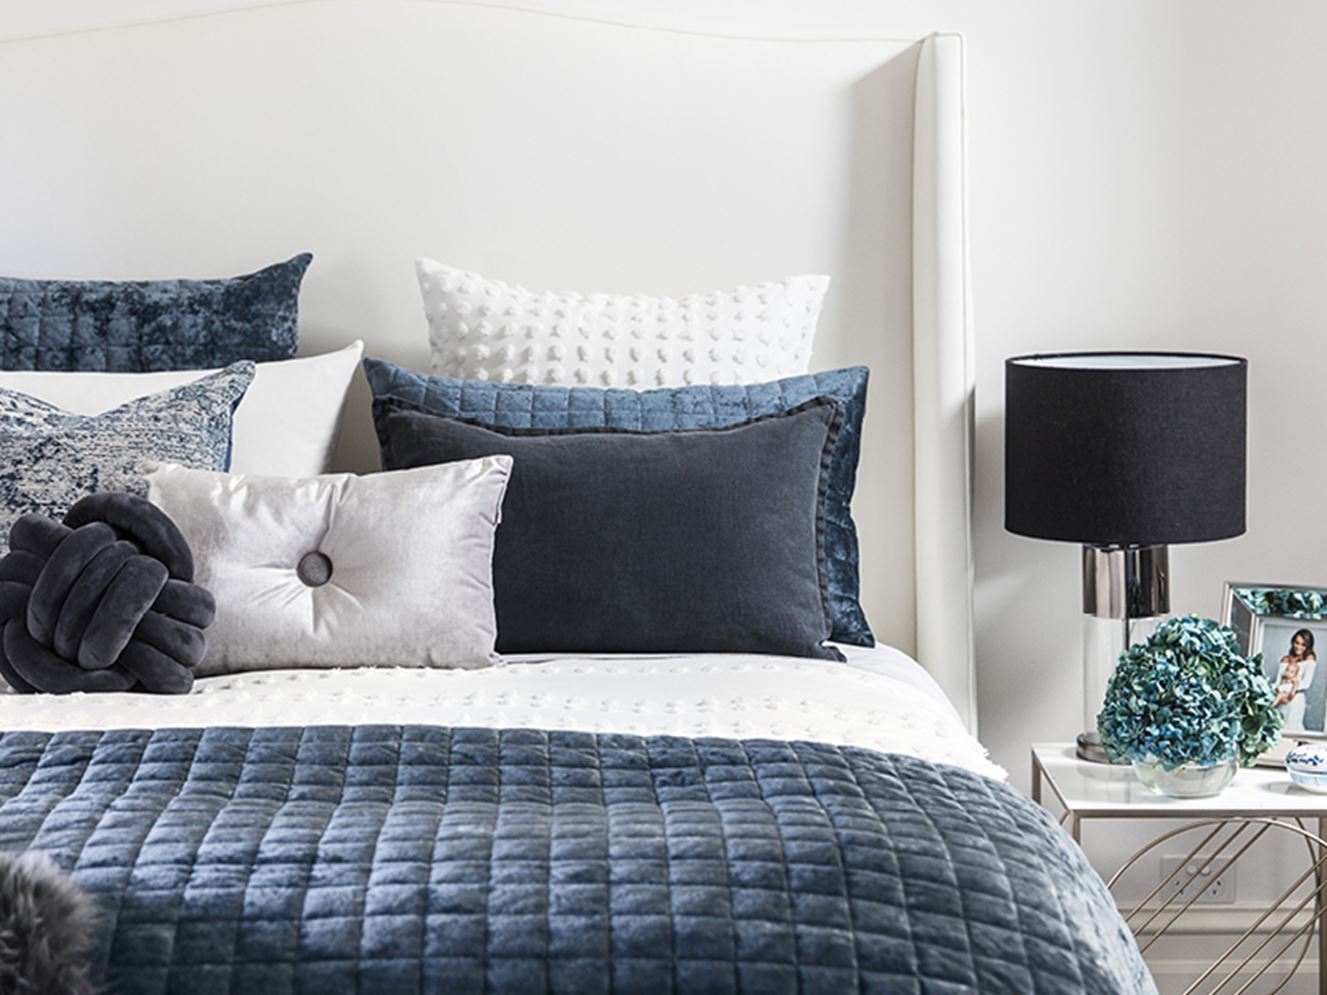 Luxurious navy blue coverlet and matching pillowcases, styled against a white textured quilt cover and decorative cushions in velvet silver and vintage blue.